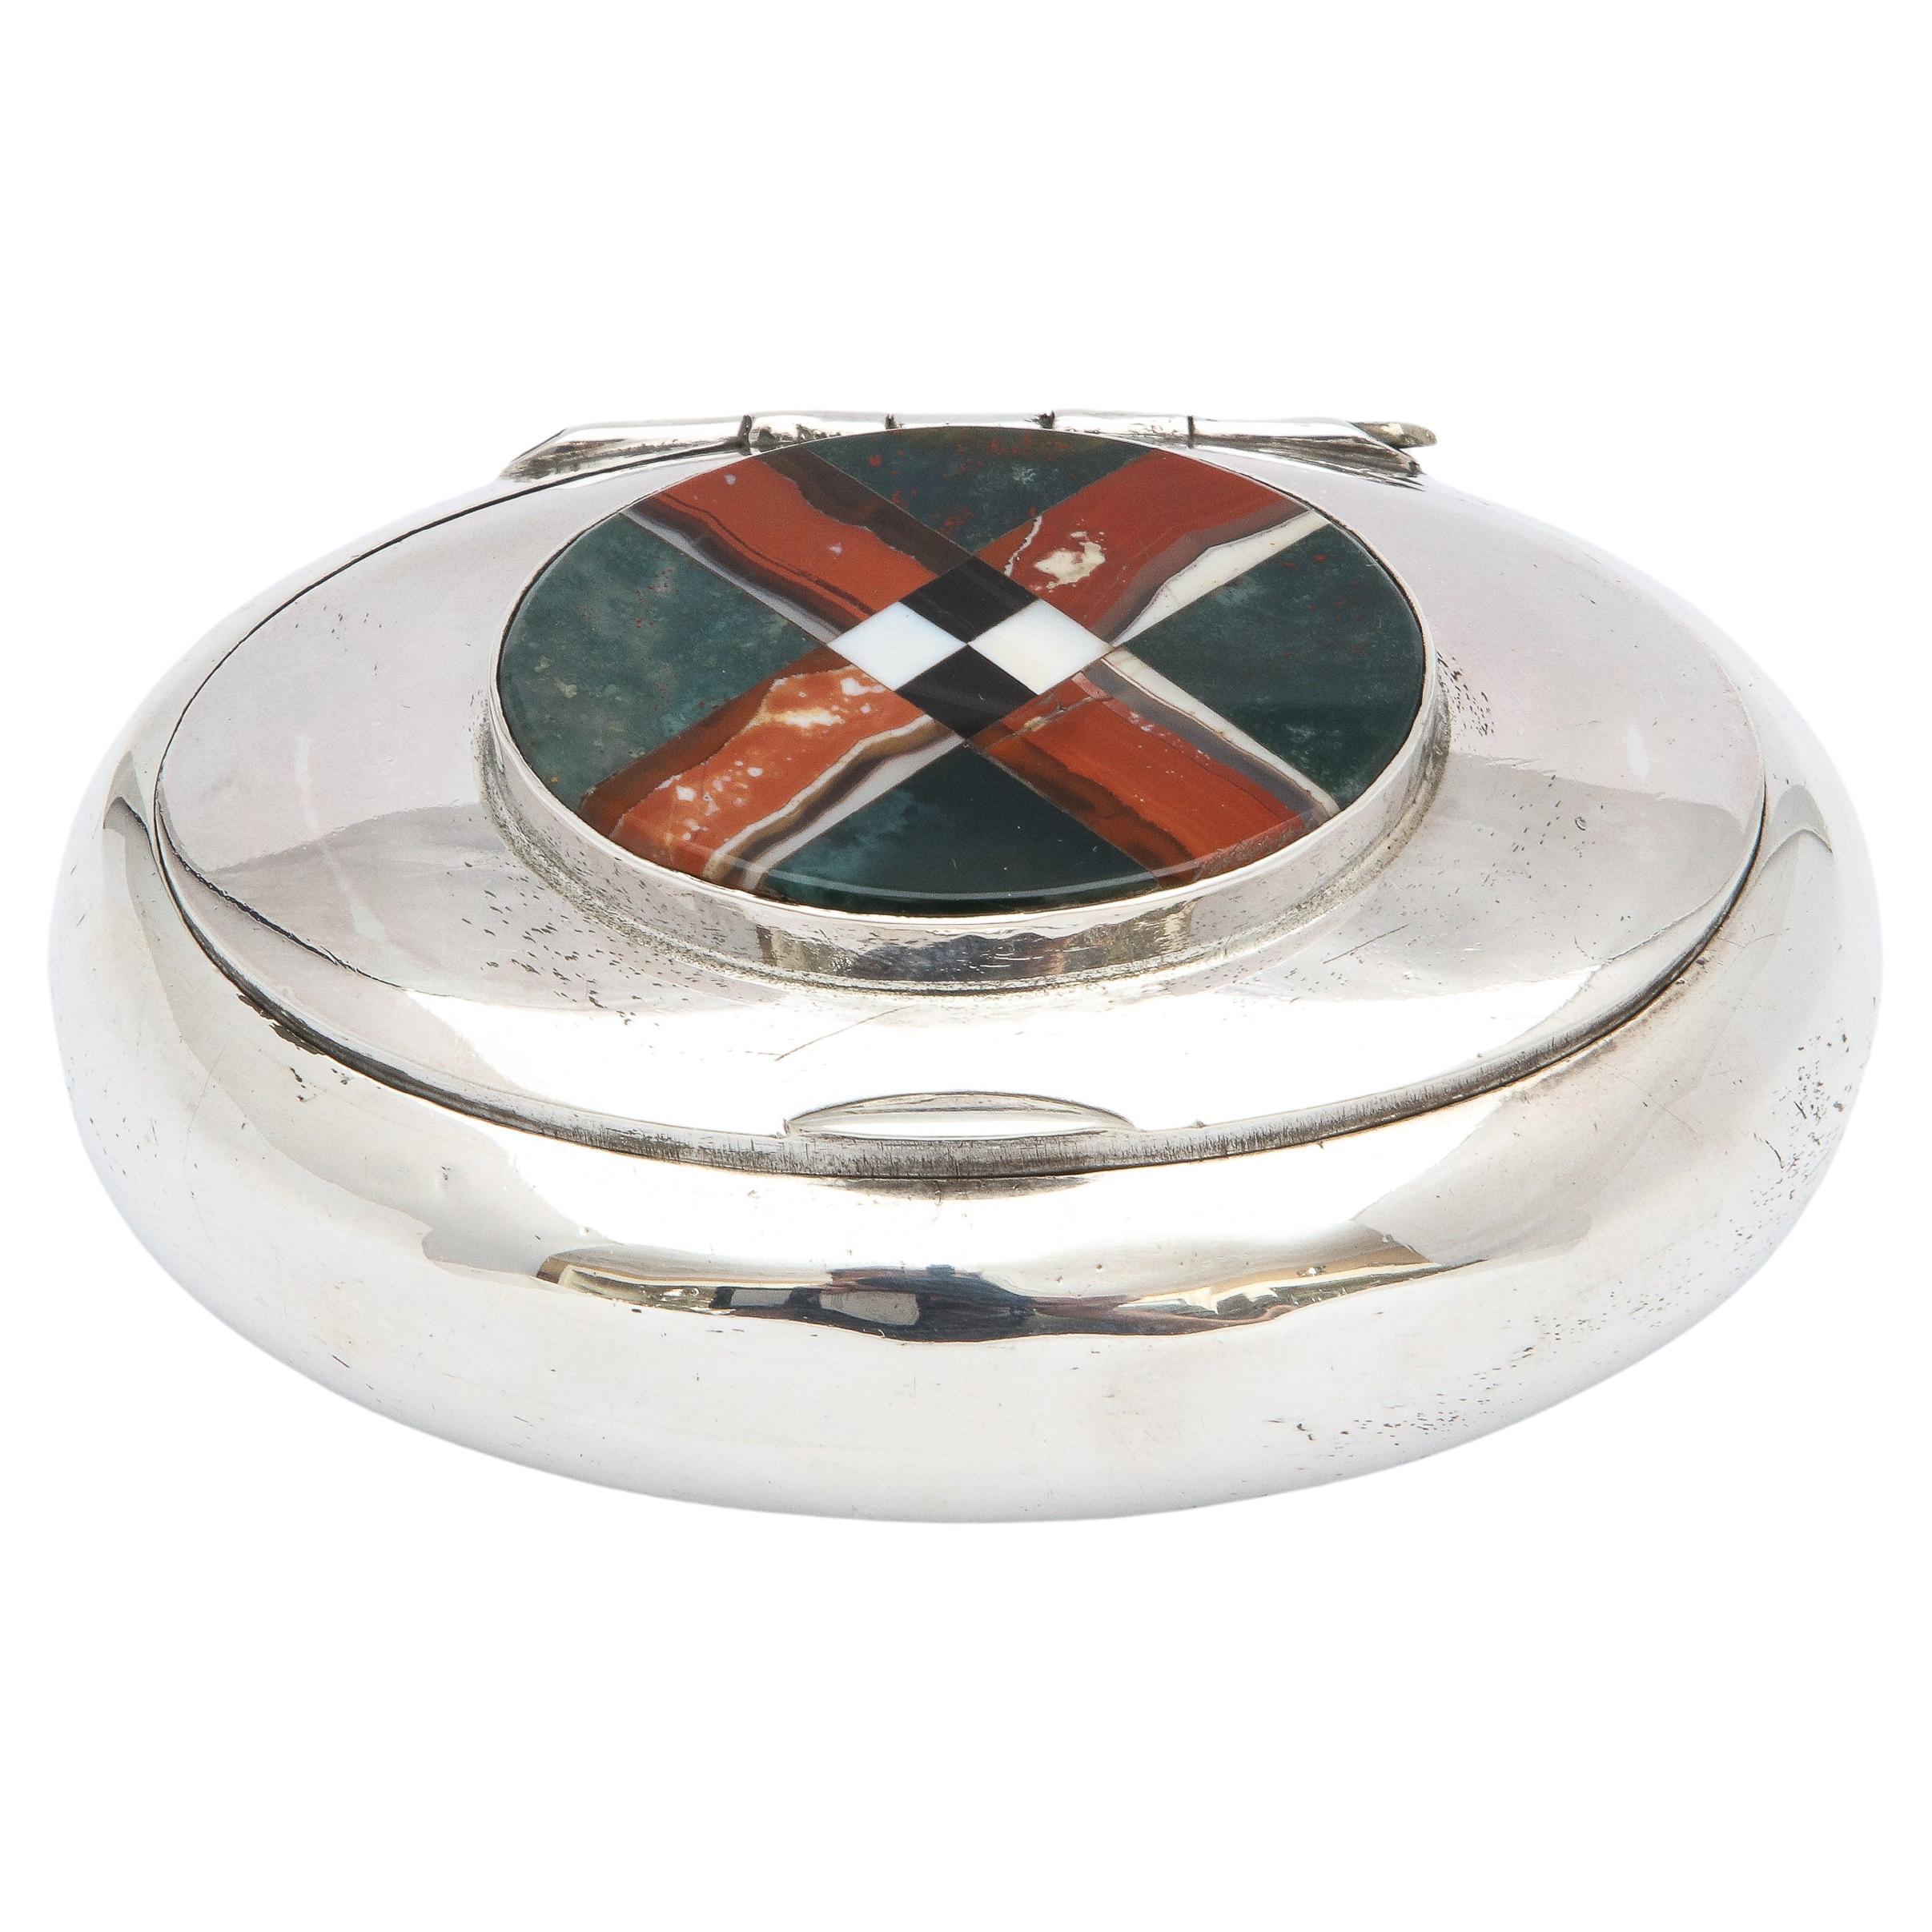 Edwardian Style Sterling Silver and Scottish Agate Trinkets Box with Hinged Lid